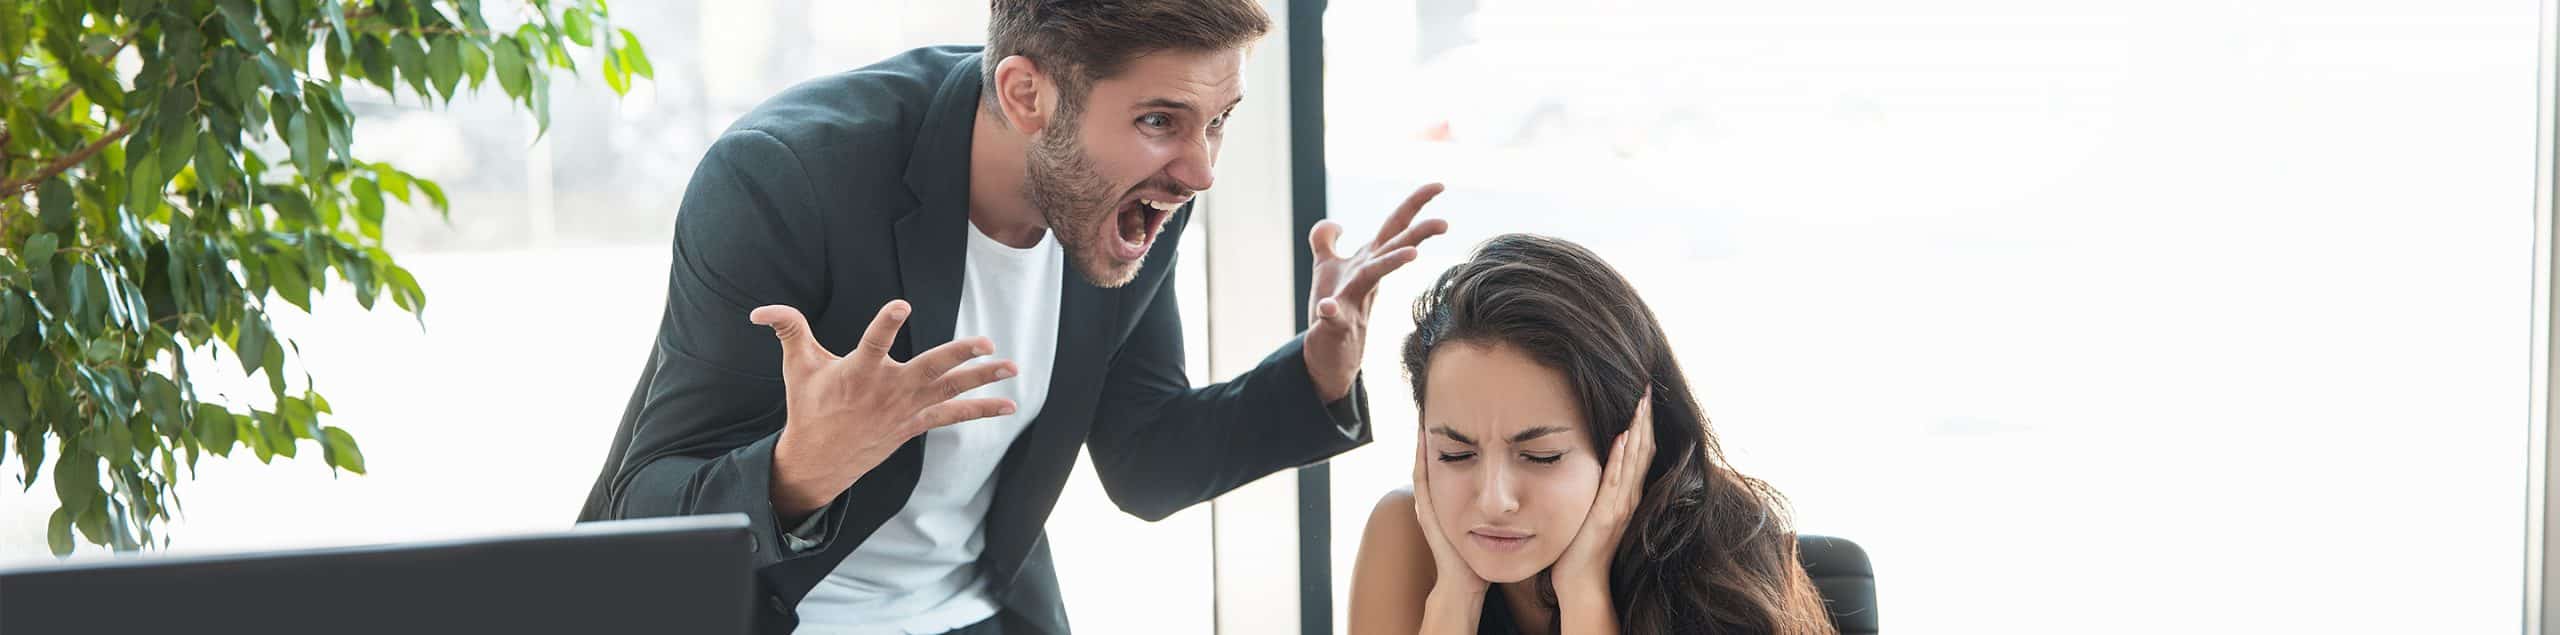 image for How to Prove Retaliation in the Workplace | Labor and Employment Attorney